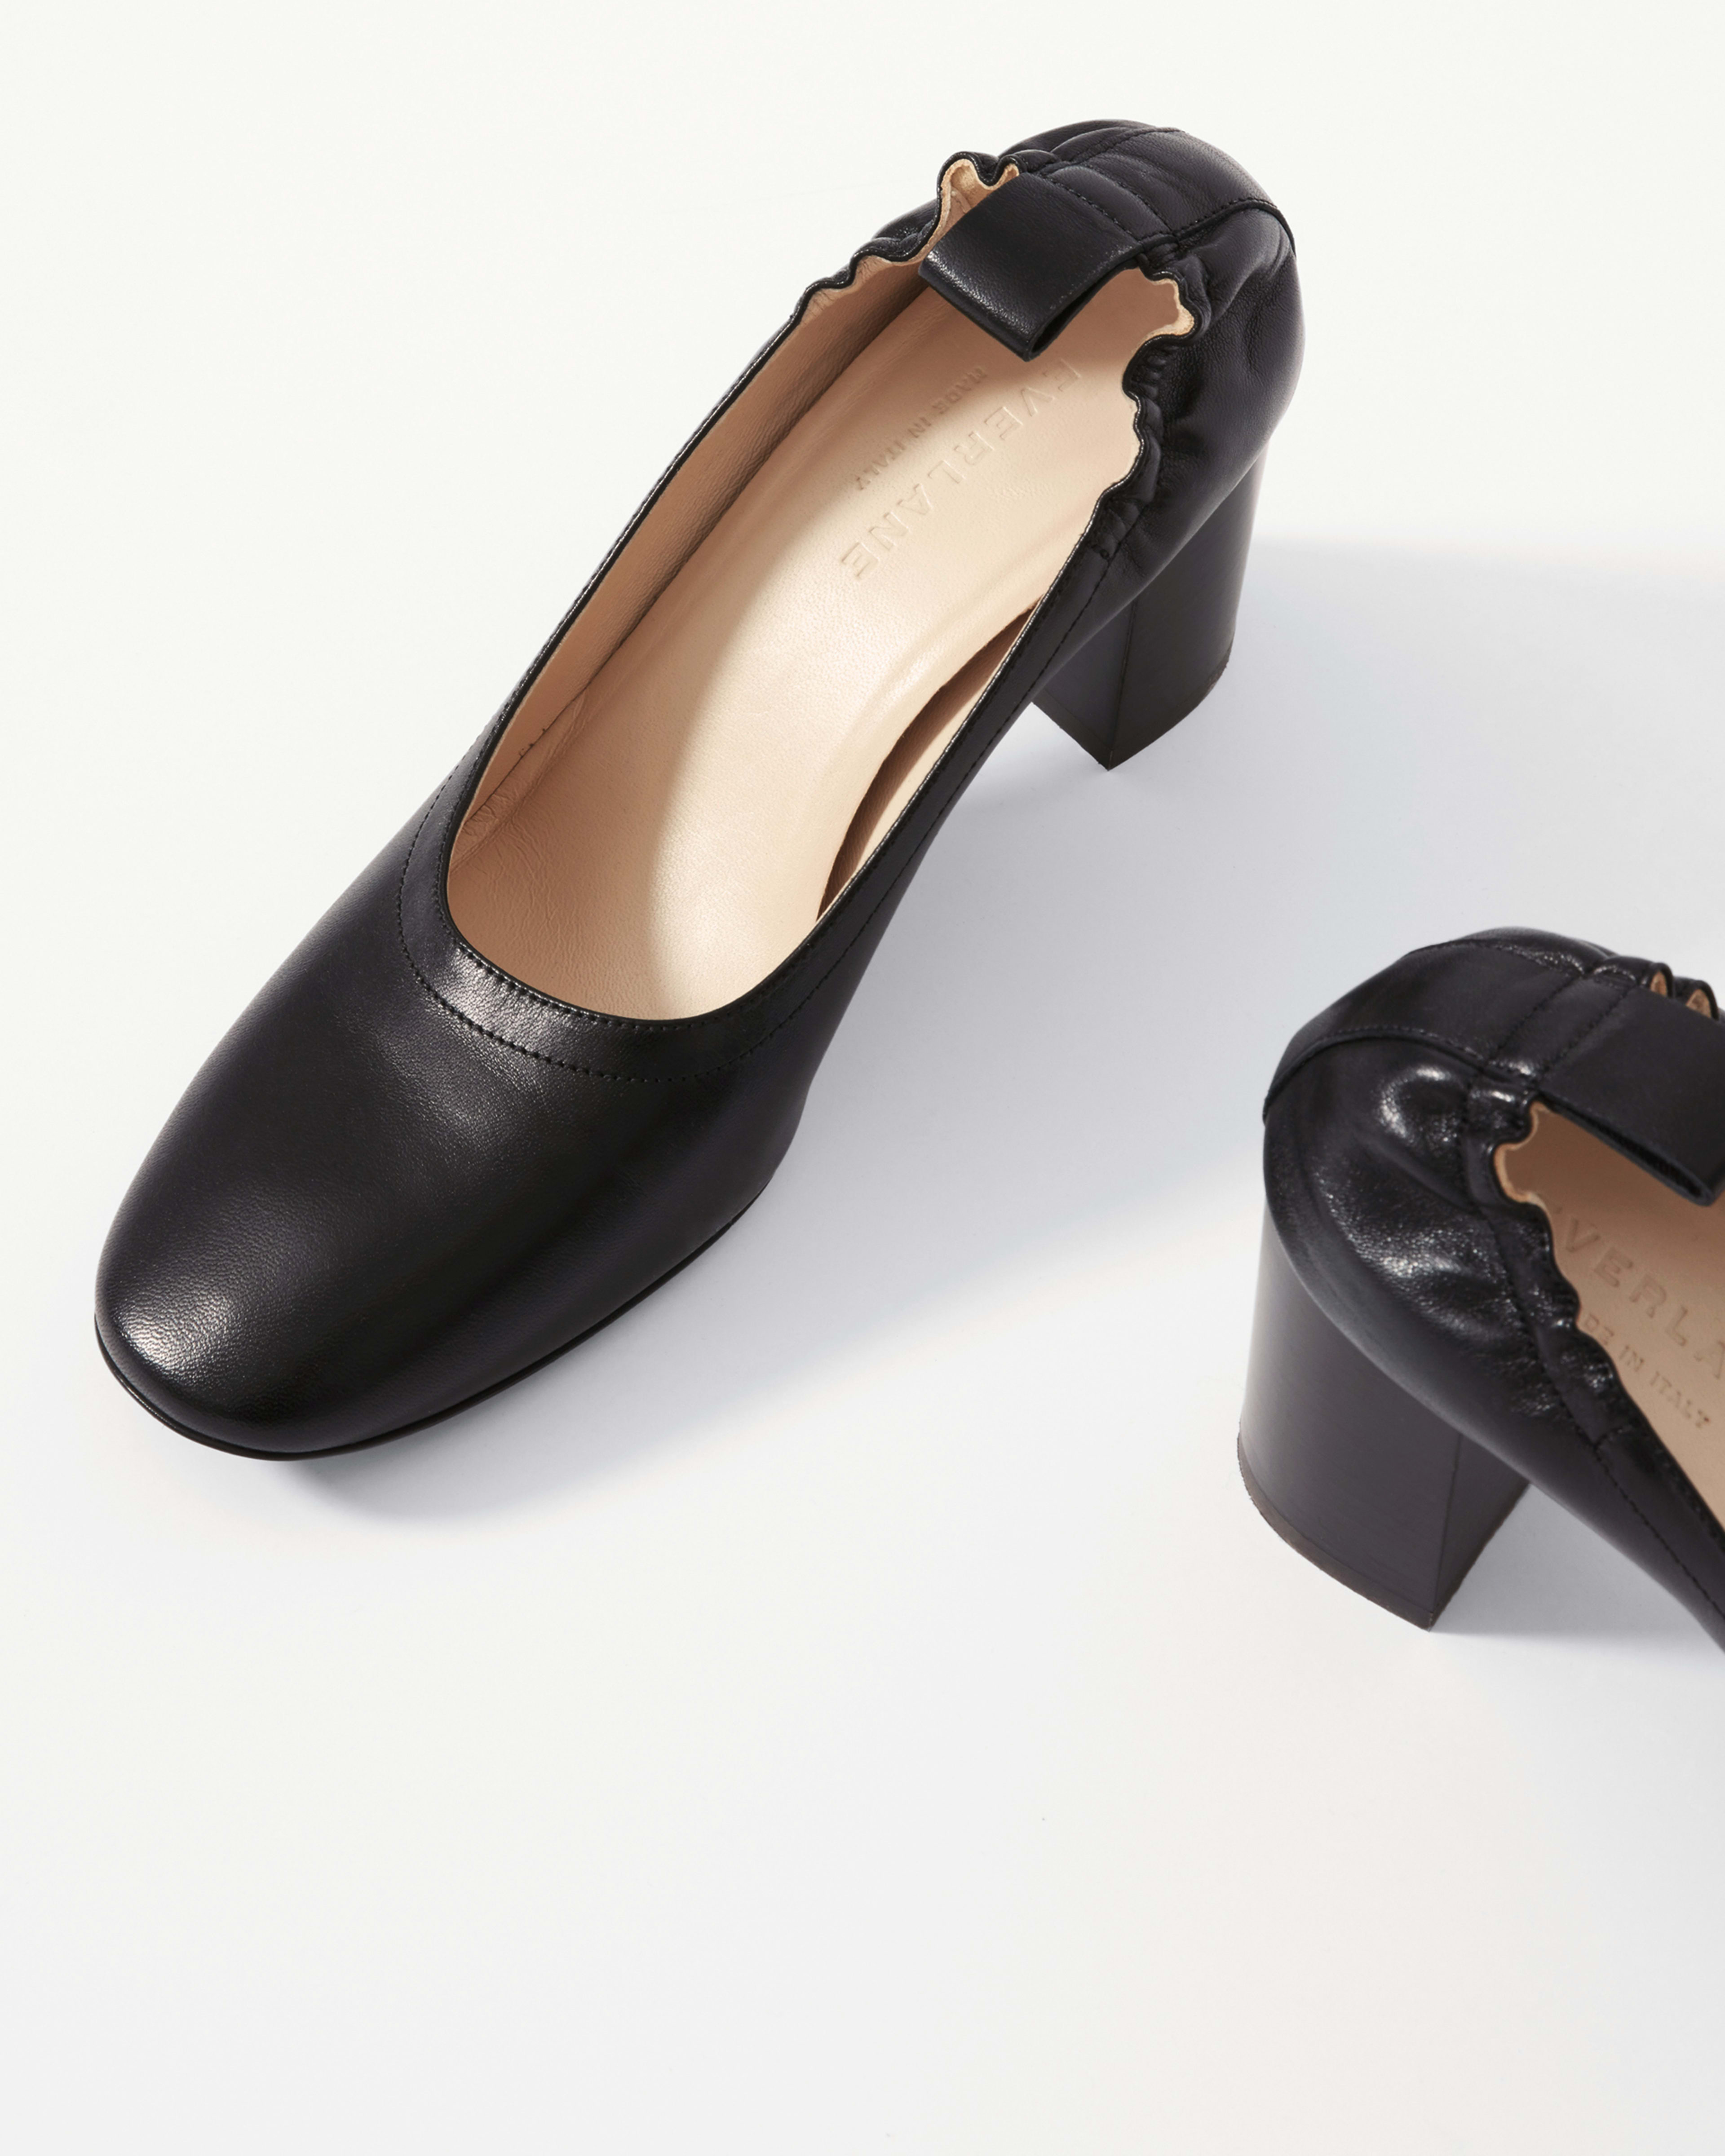 The Day High Heel Black Stacked – Everlane